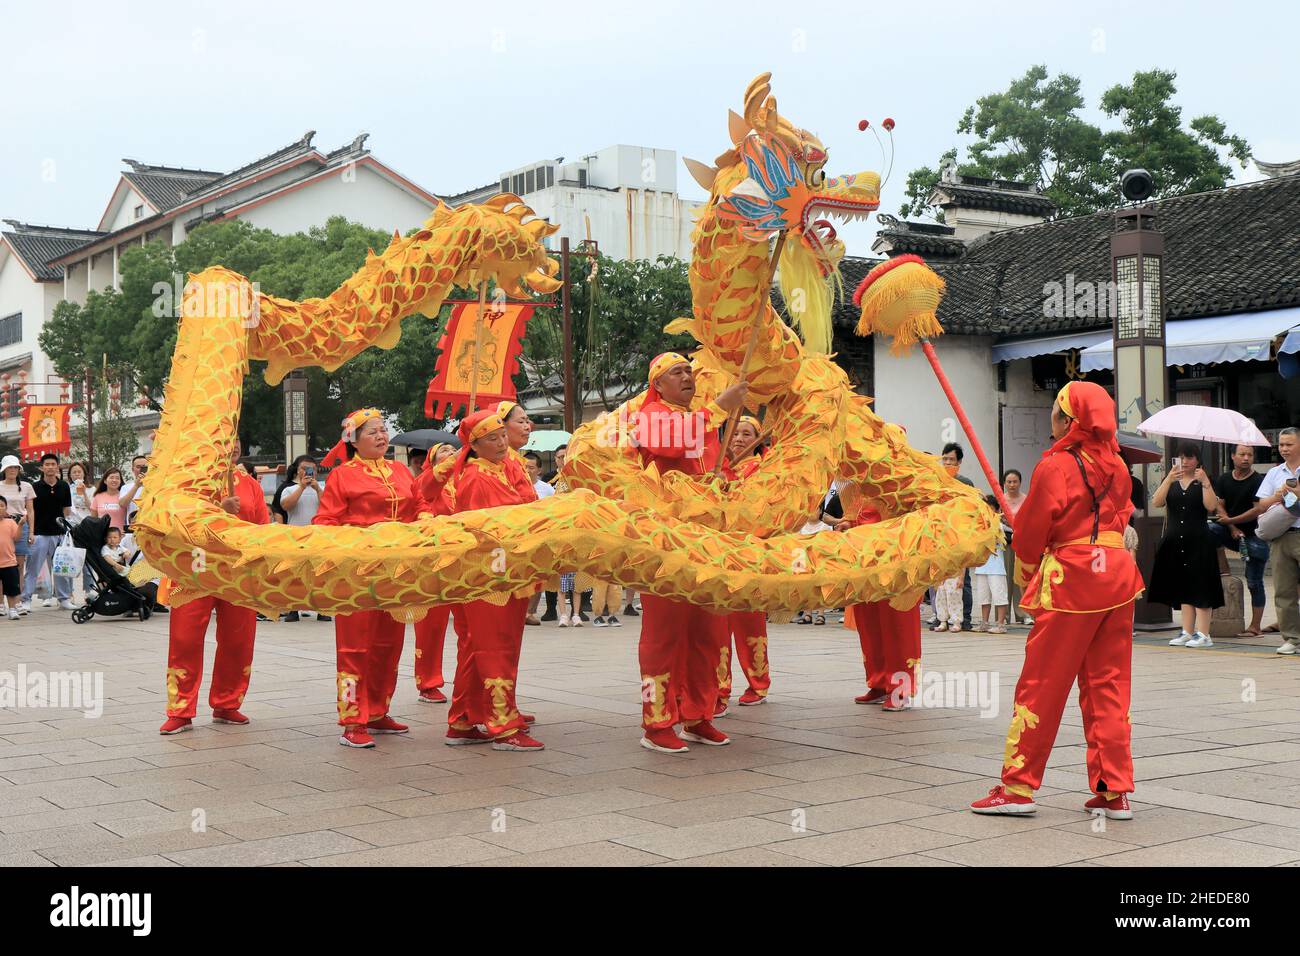 A traditional dragon dance is staged during Dragonboat Festival in the Chinese water town of Zhouzhuang near Shanghai Stock Photo